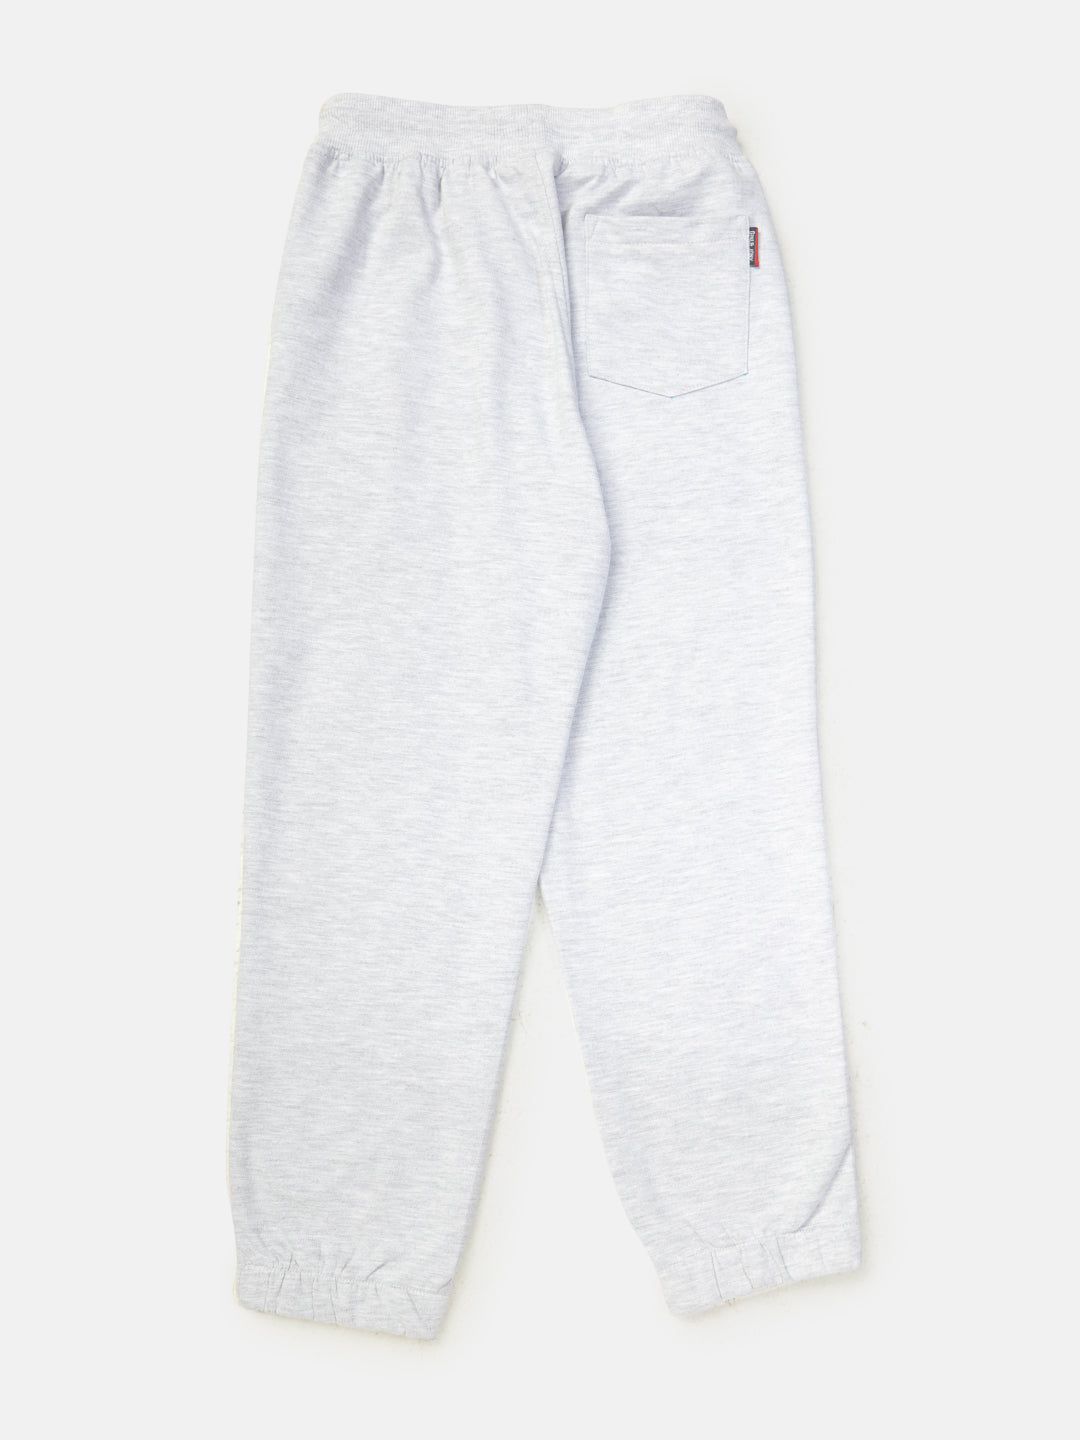 Boys White Cotton Solid Elasticated Track Pant